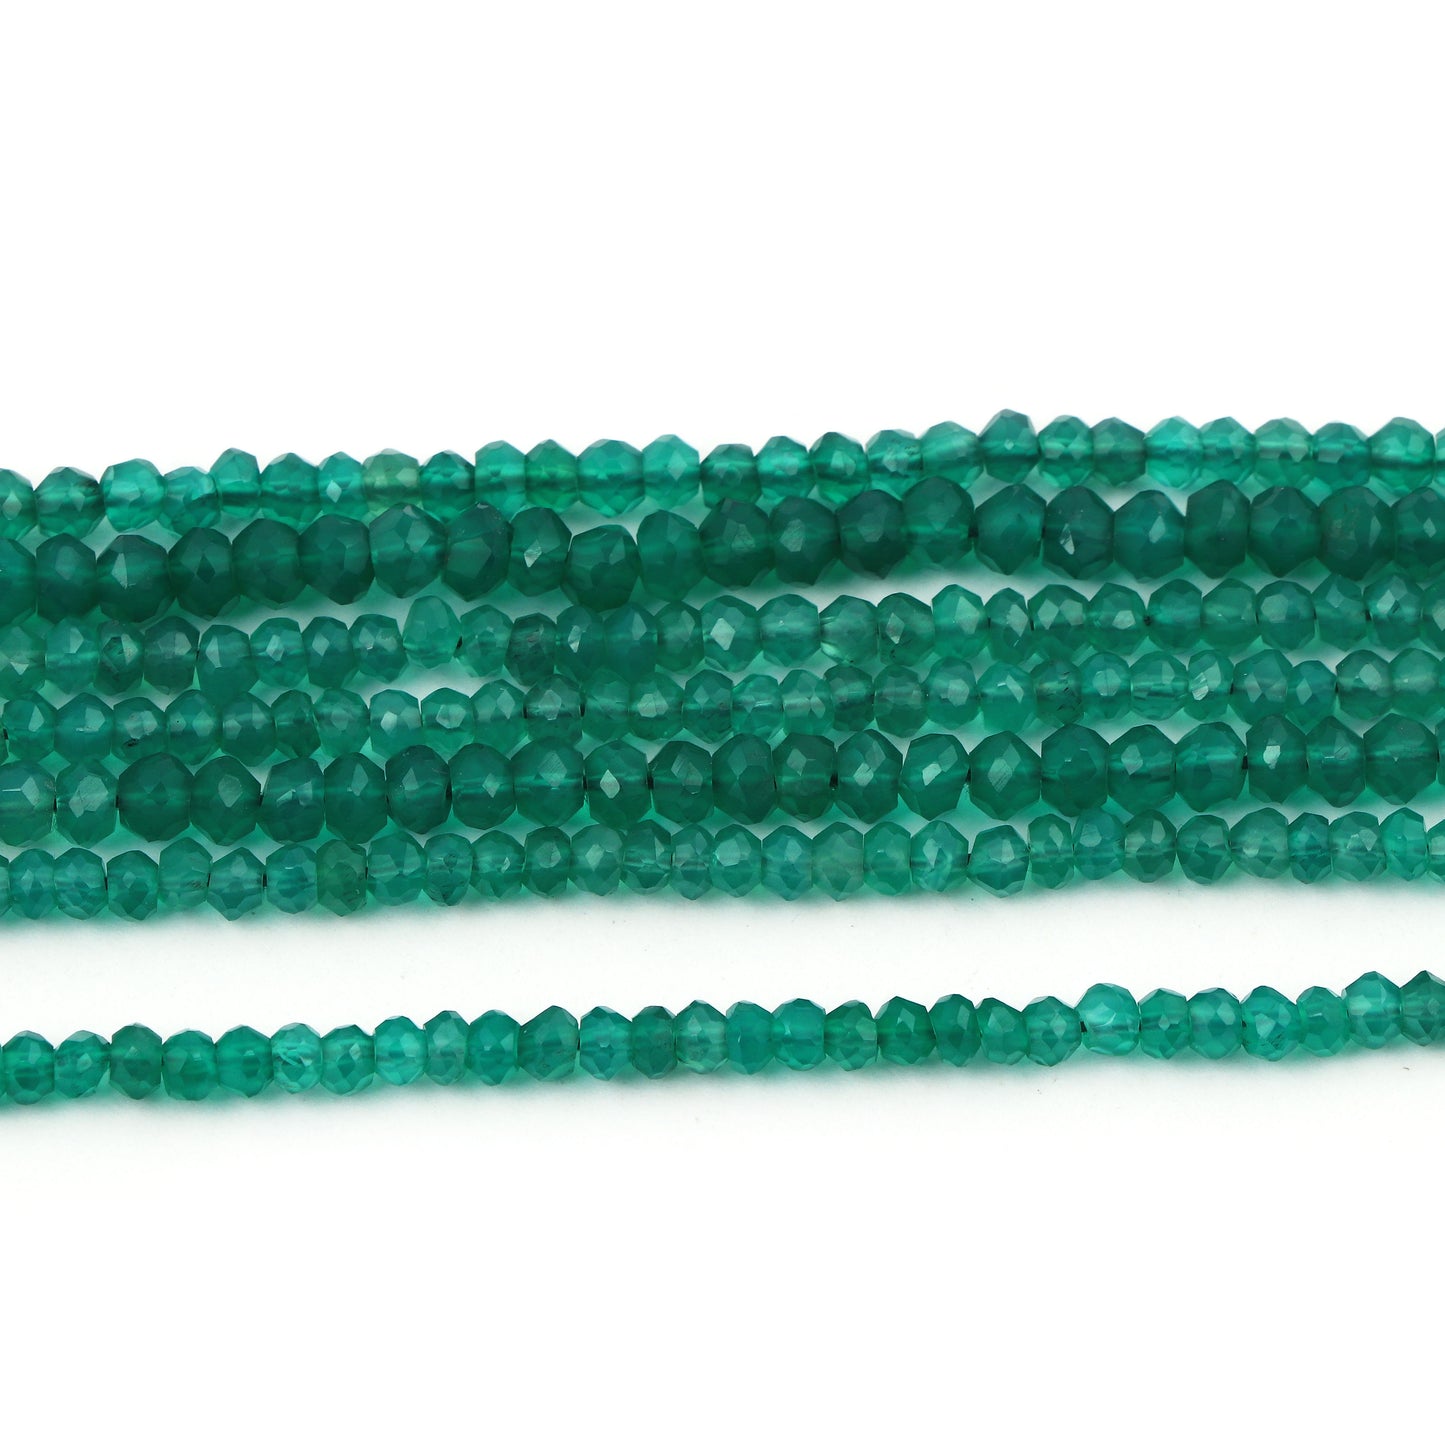 Natural Green Onyx Rondelle Faceted Gemstone Beads Strand 13 Inches